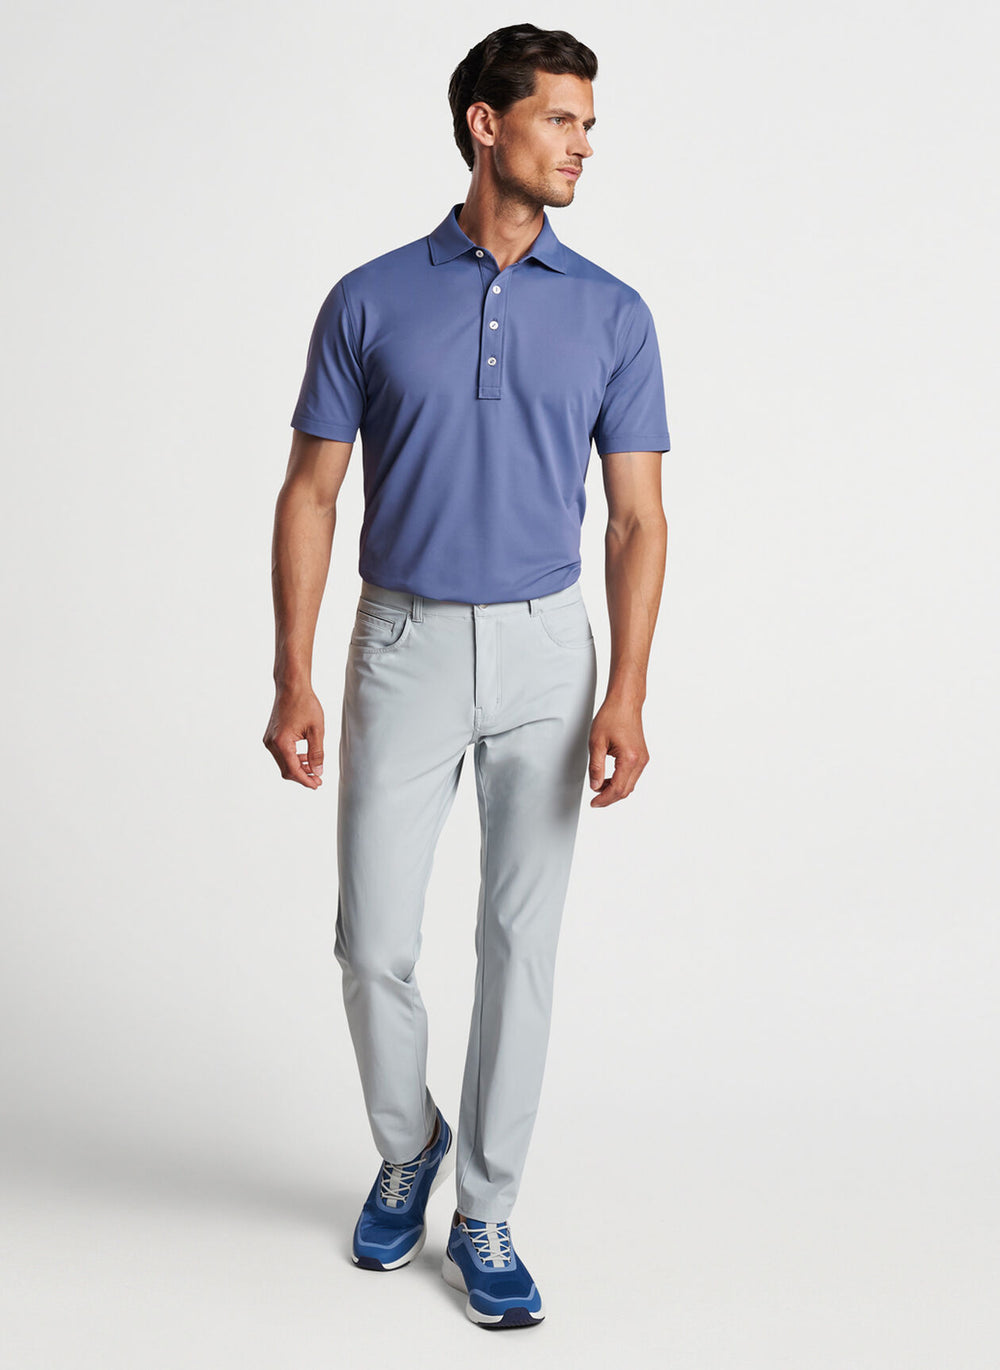 Peter Millar Soul Performance Mesh Polo In Blue Pearl